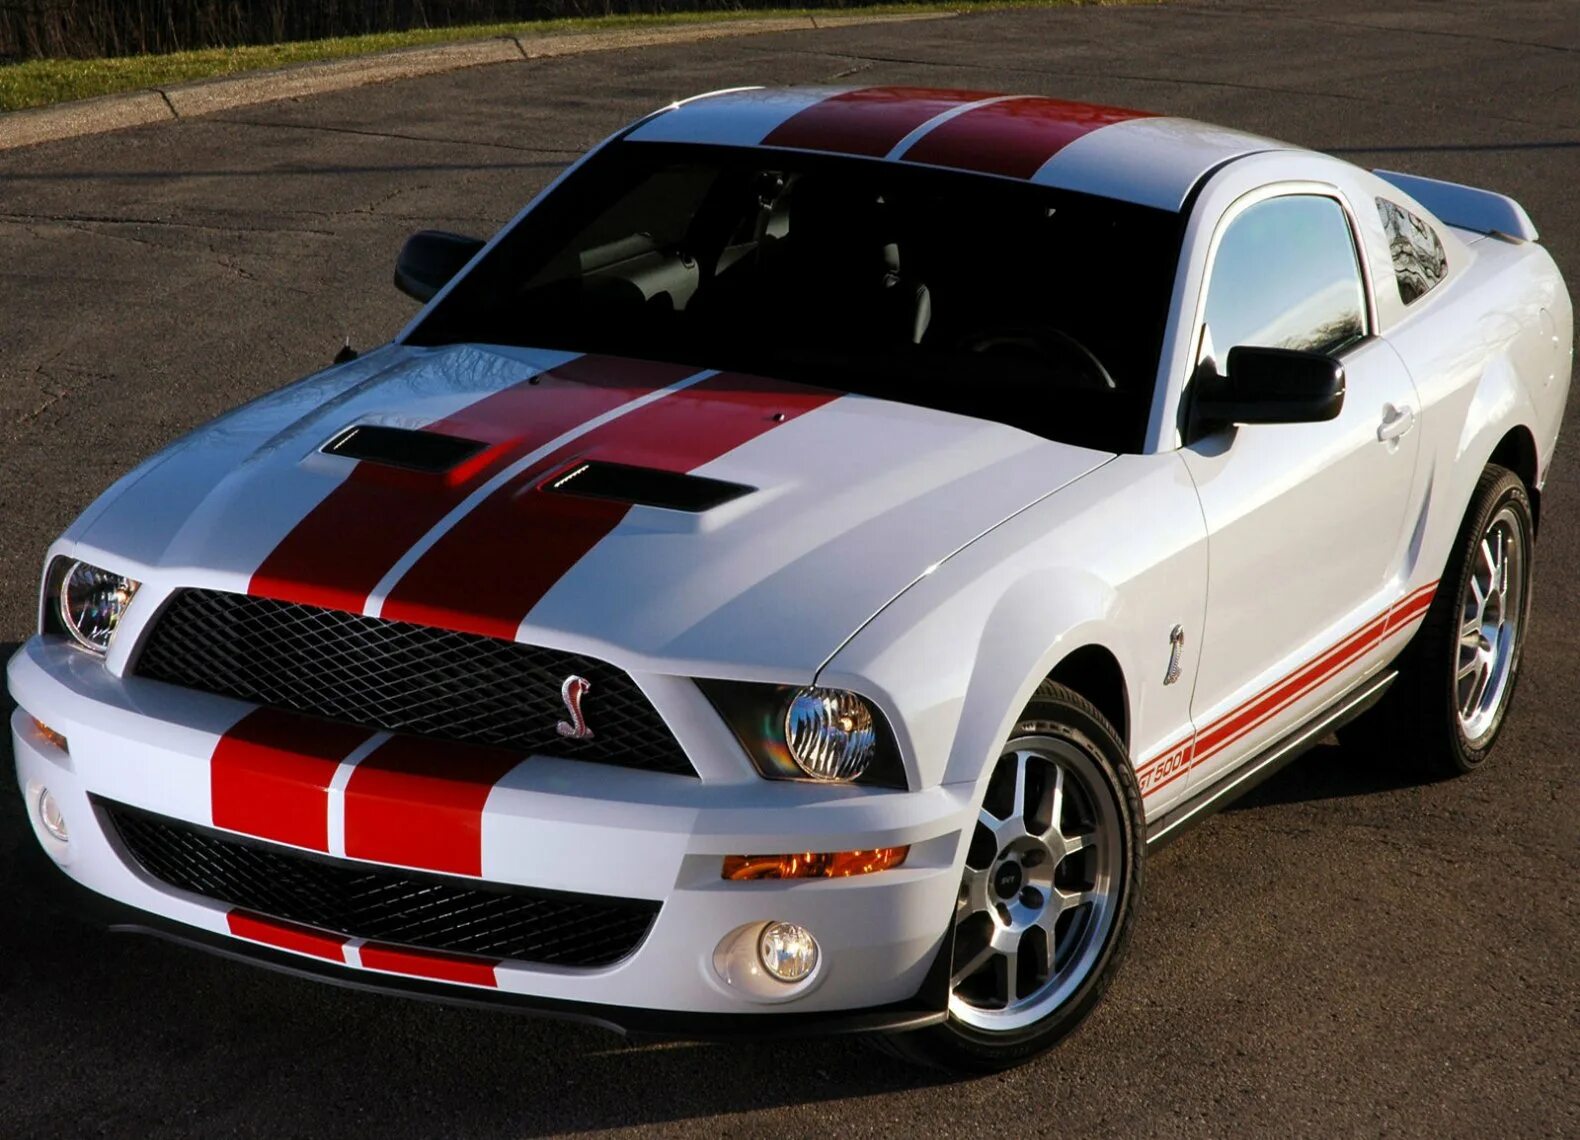 Mustang shelby gt 500. Форд Мустанг gt 500 Shelby. Ford Shelby gt500. Ford Mustang gt500.